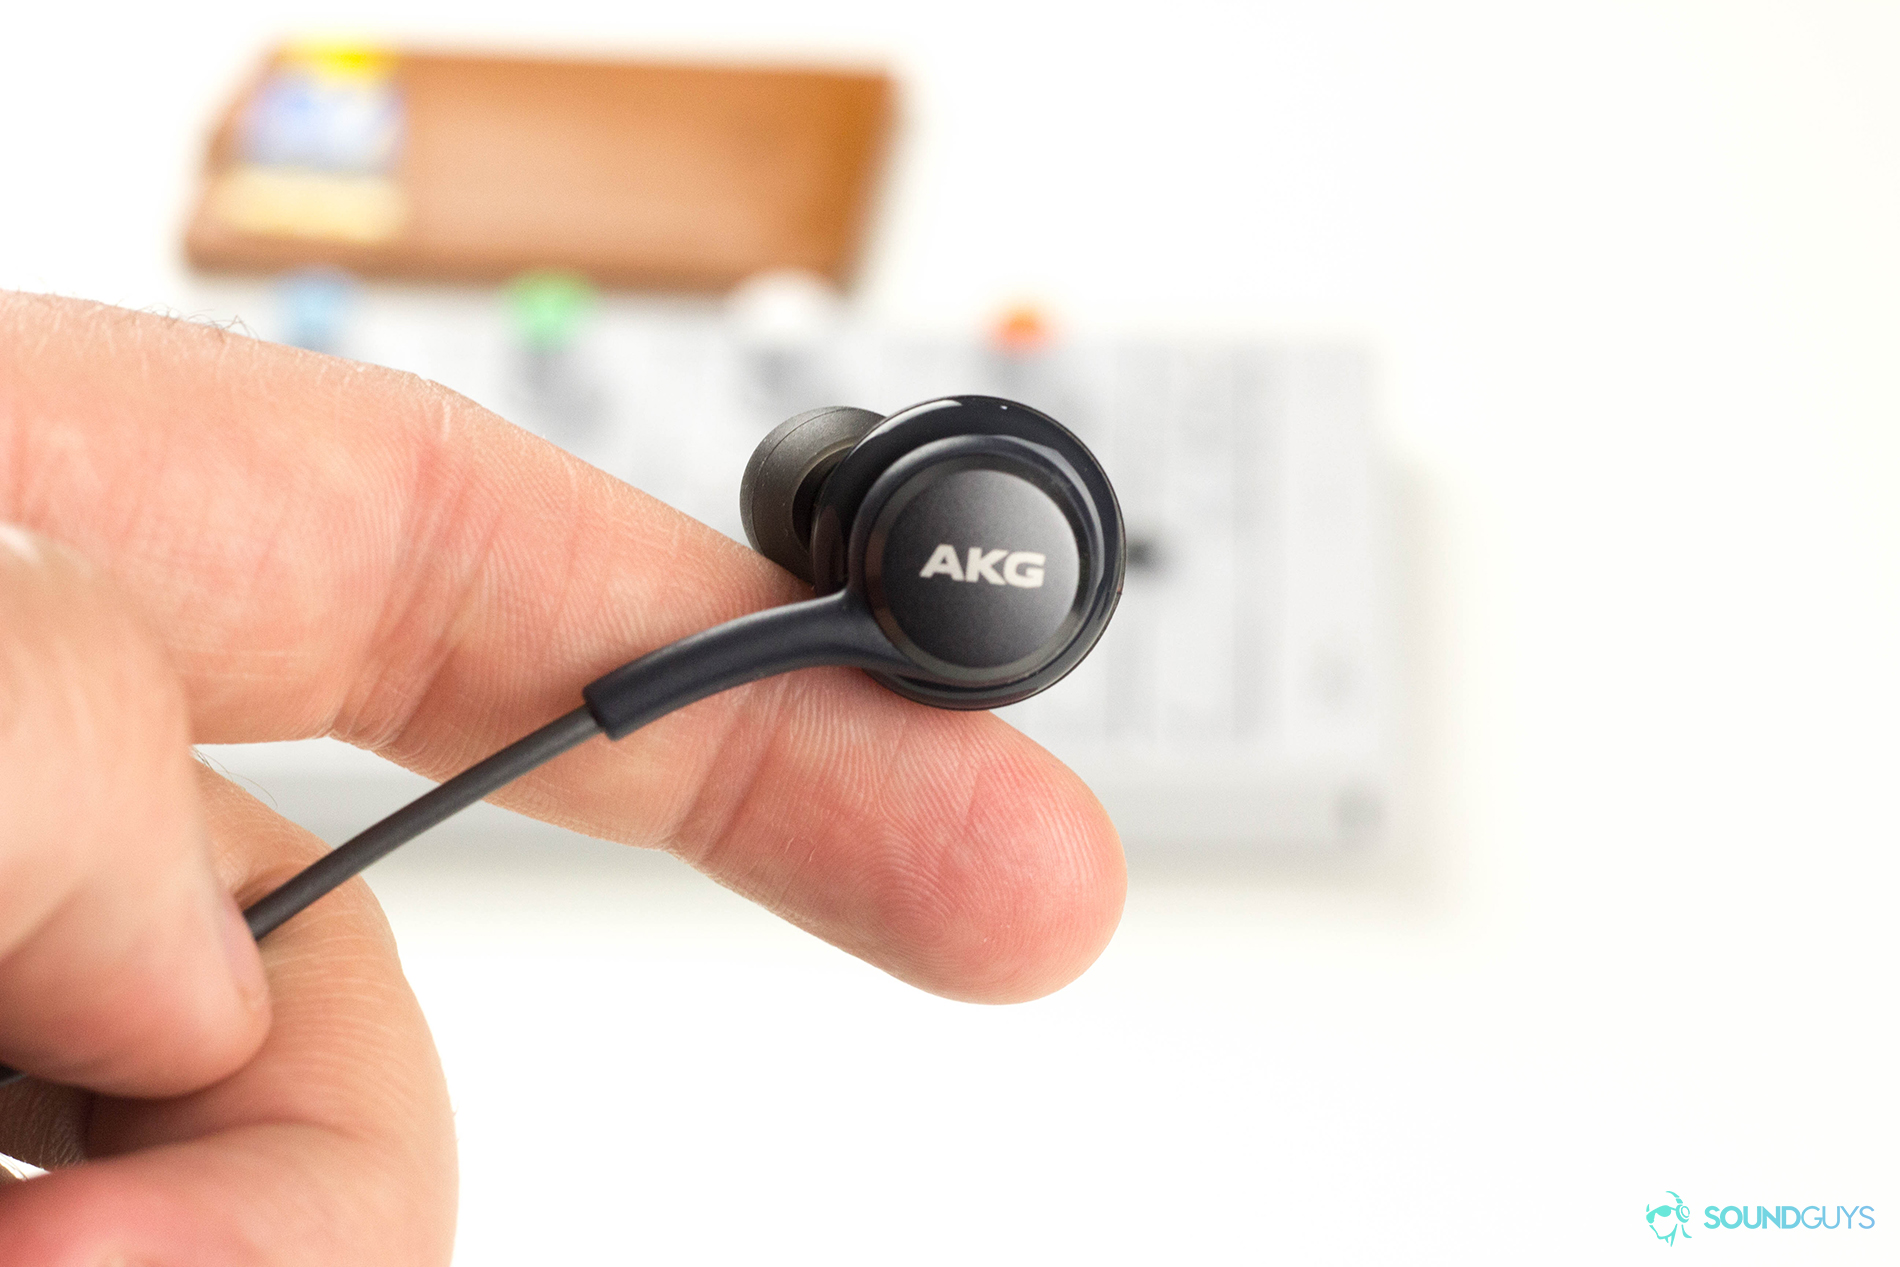 Samsung Galaxy S8 headsets are not from AKG